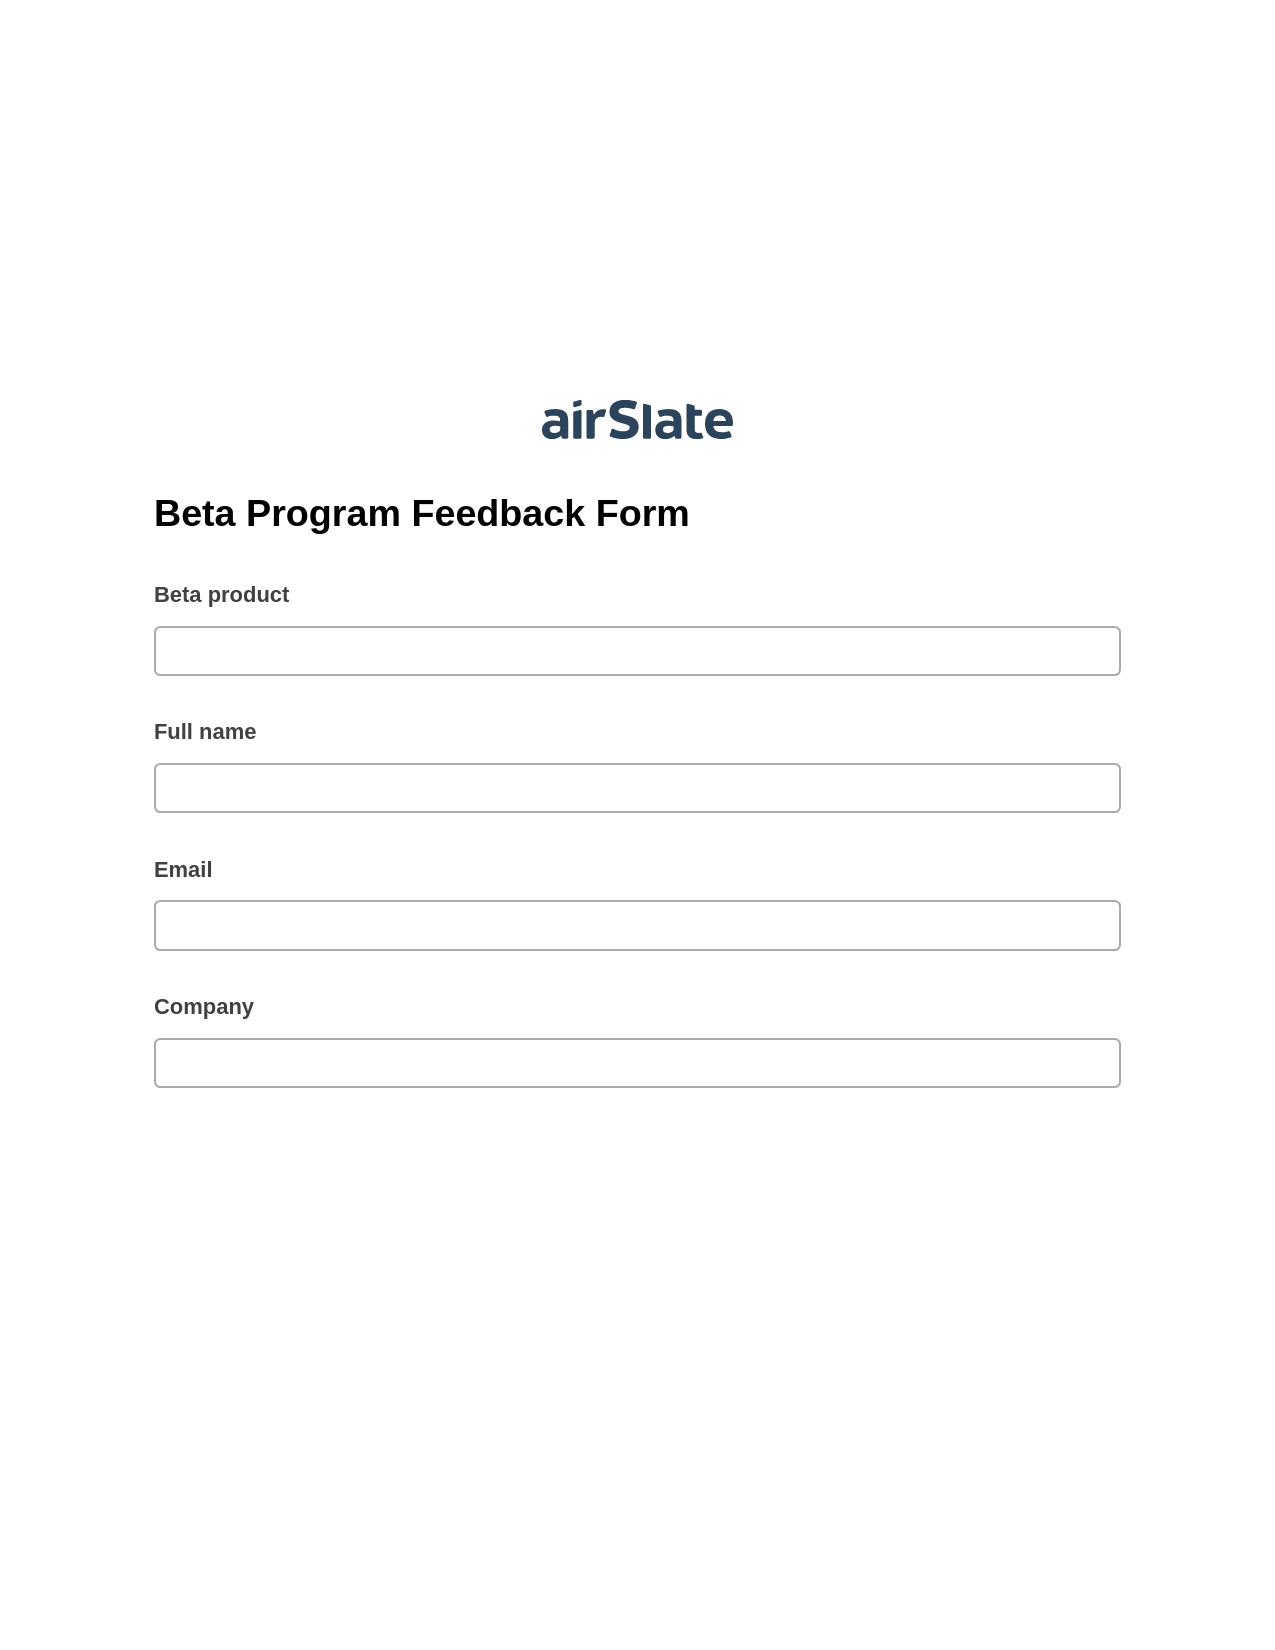 Beta Program Feedback Form Pre-fill from NetSuite Records Bot, Update MS Dynamics 365 Records Bot, Export to NetSuite Record Bot